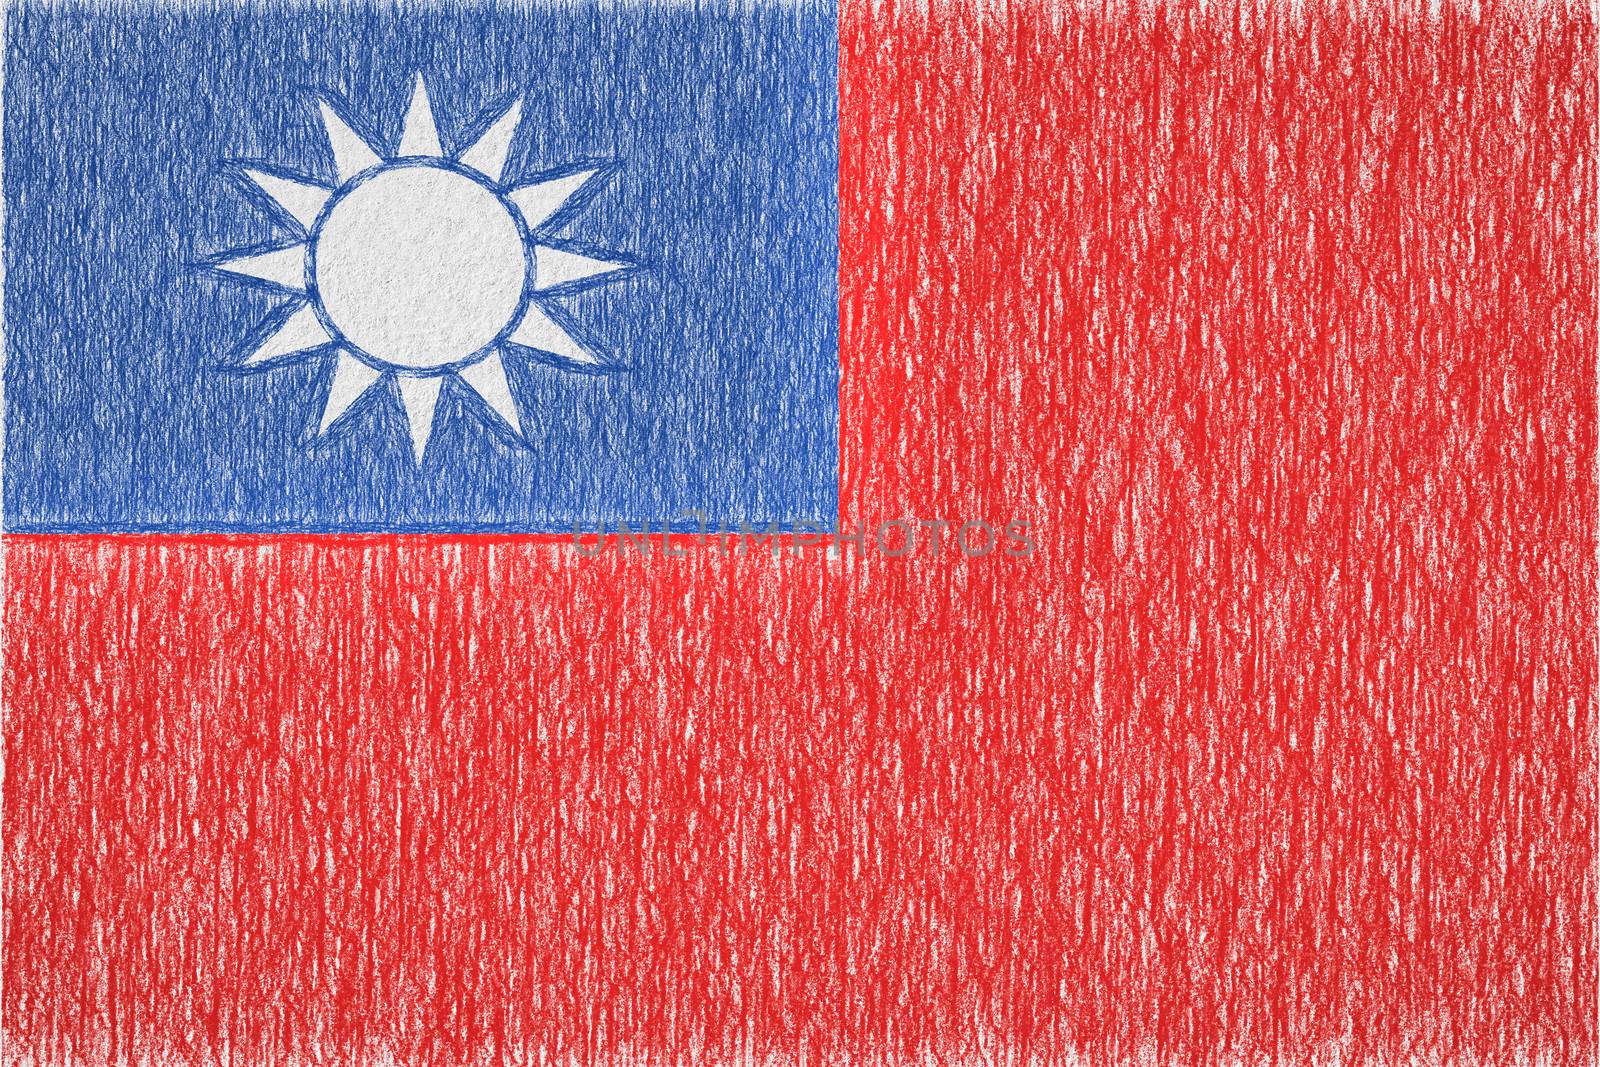 Taiwan painted flag. Patriotic drawing on paper background. National flag of Taiwan